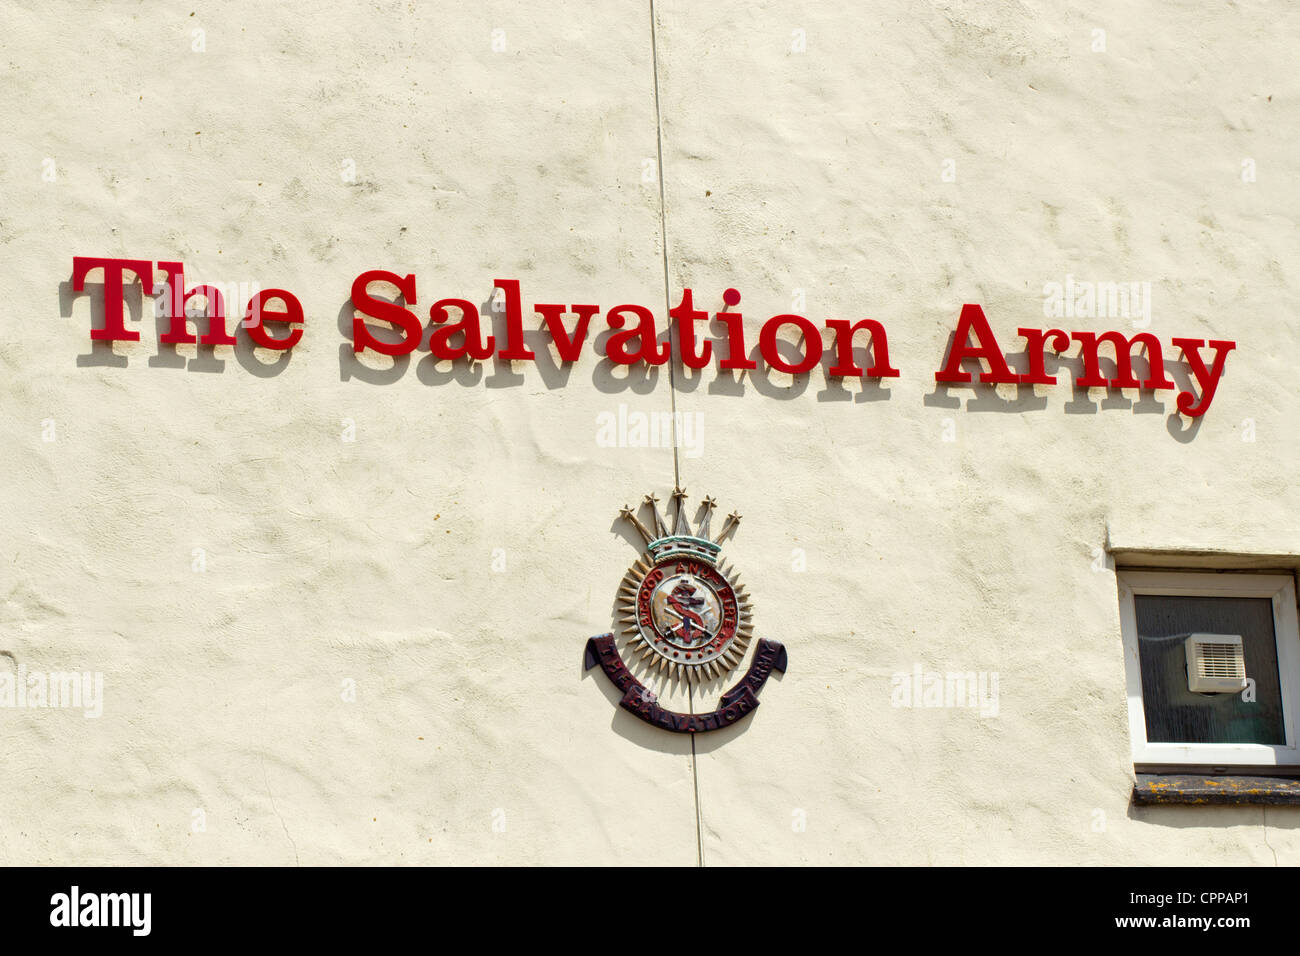 The Salvation Army sign and weathered emblem in Redruth, Cornwall UK. Stock Photo